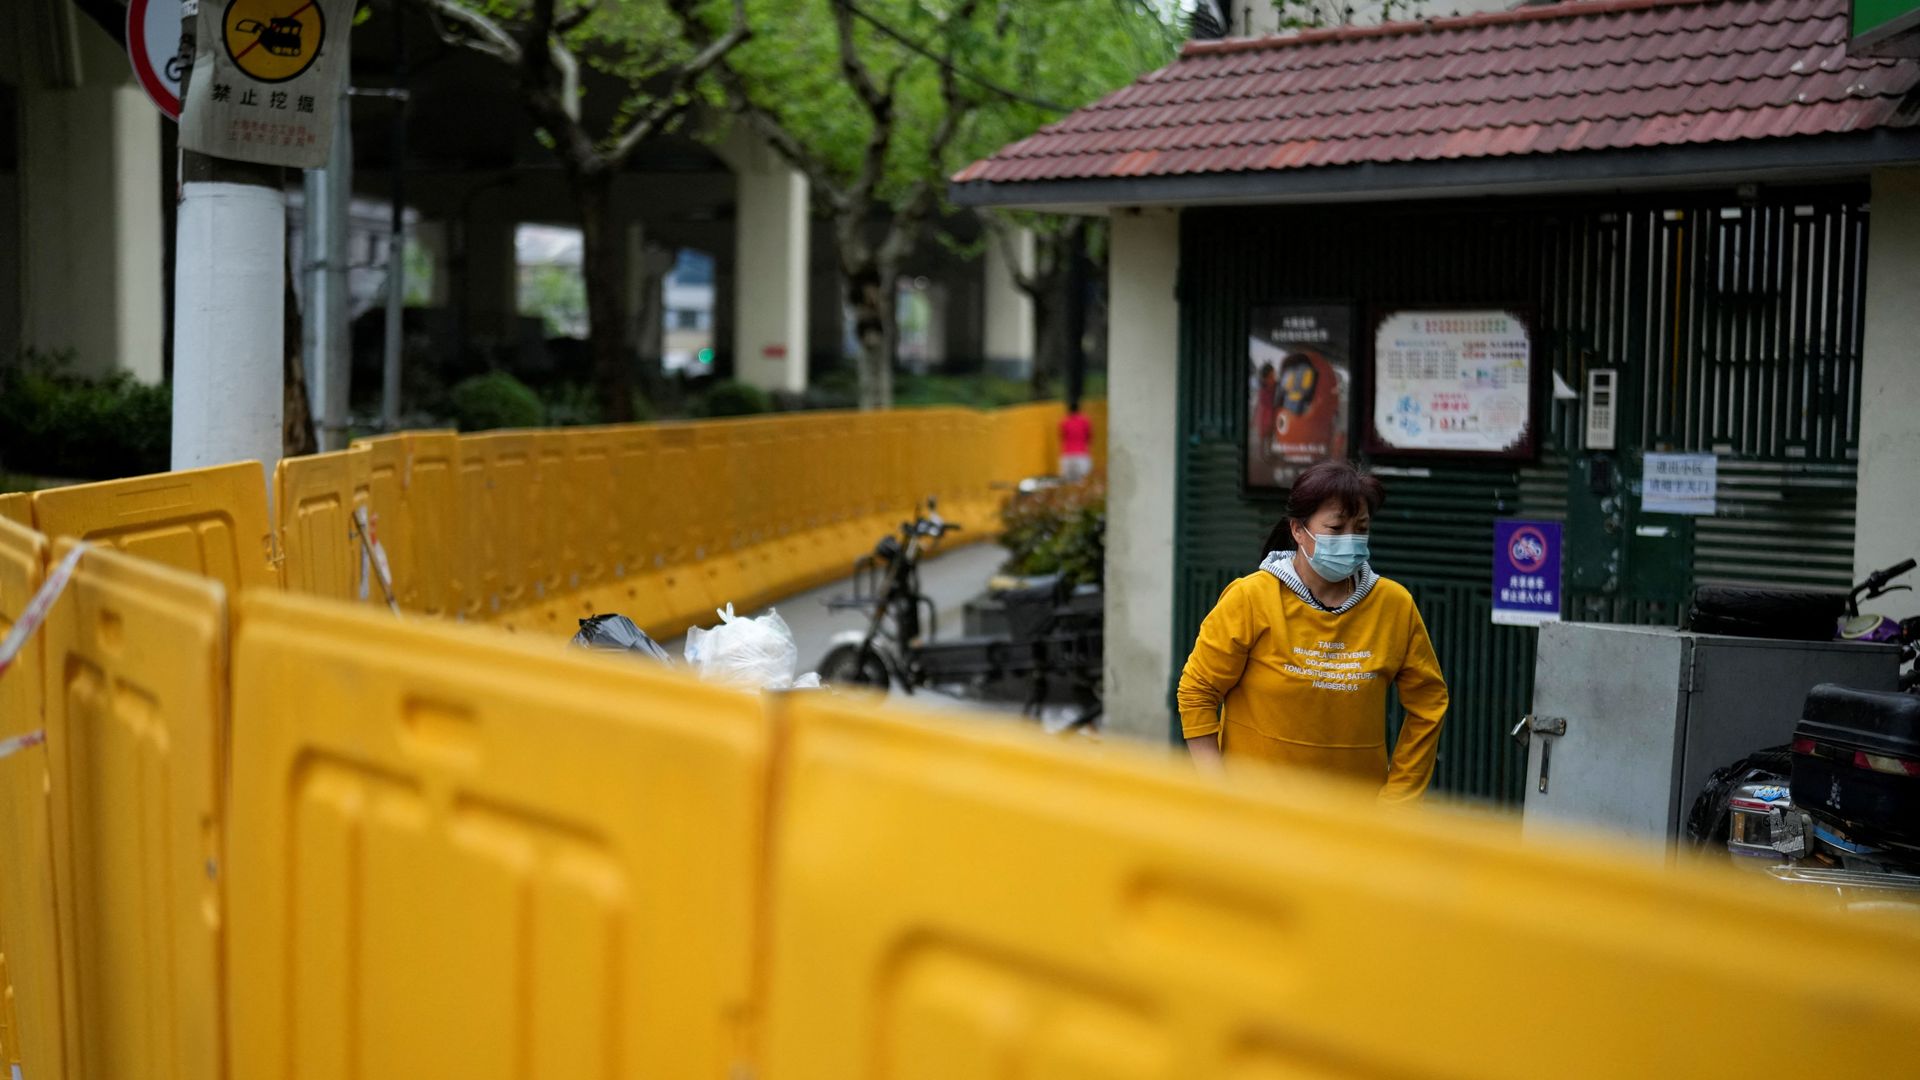 A Shanghai resident, behind barriers sealing off an area under COVID lockdown.